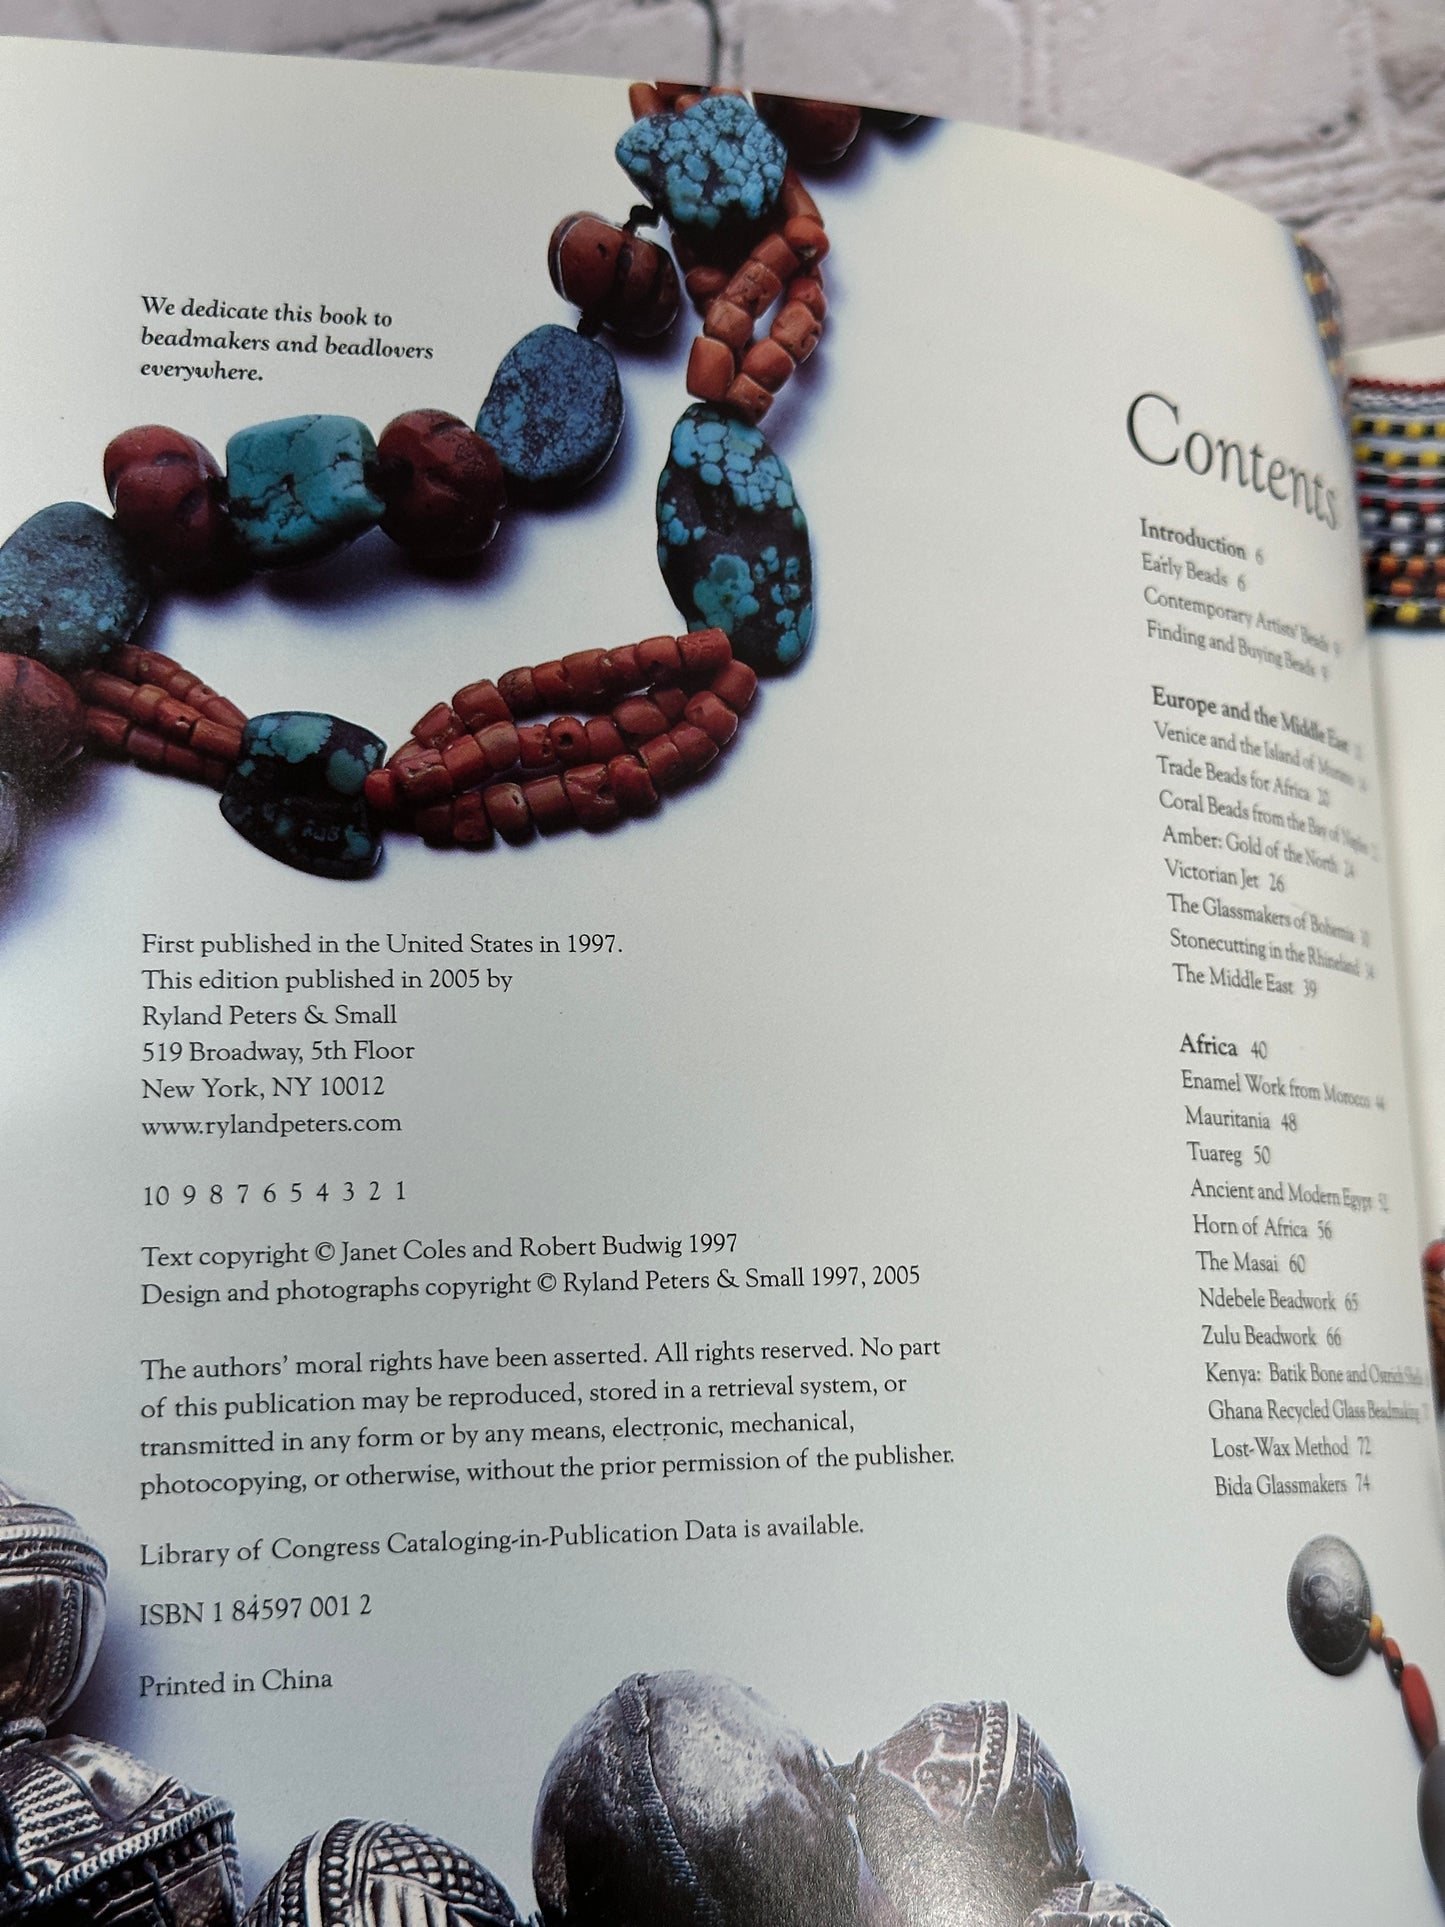 World Beads By Janet Coles & Robert Budwig [2005 · First Printing]